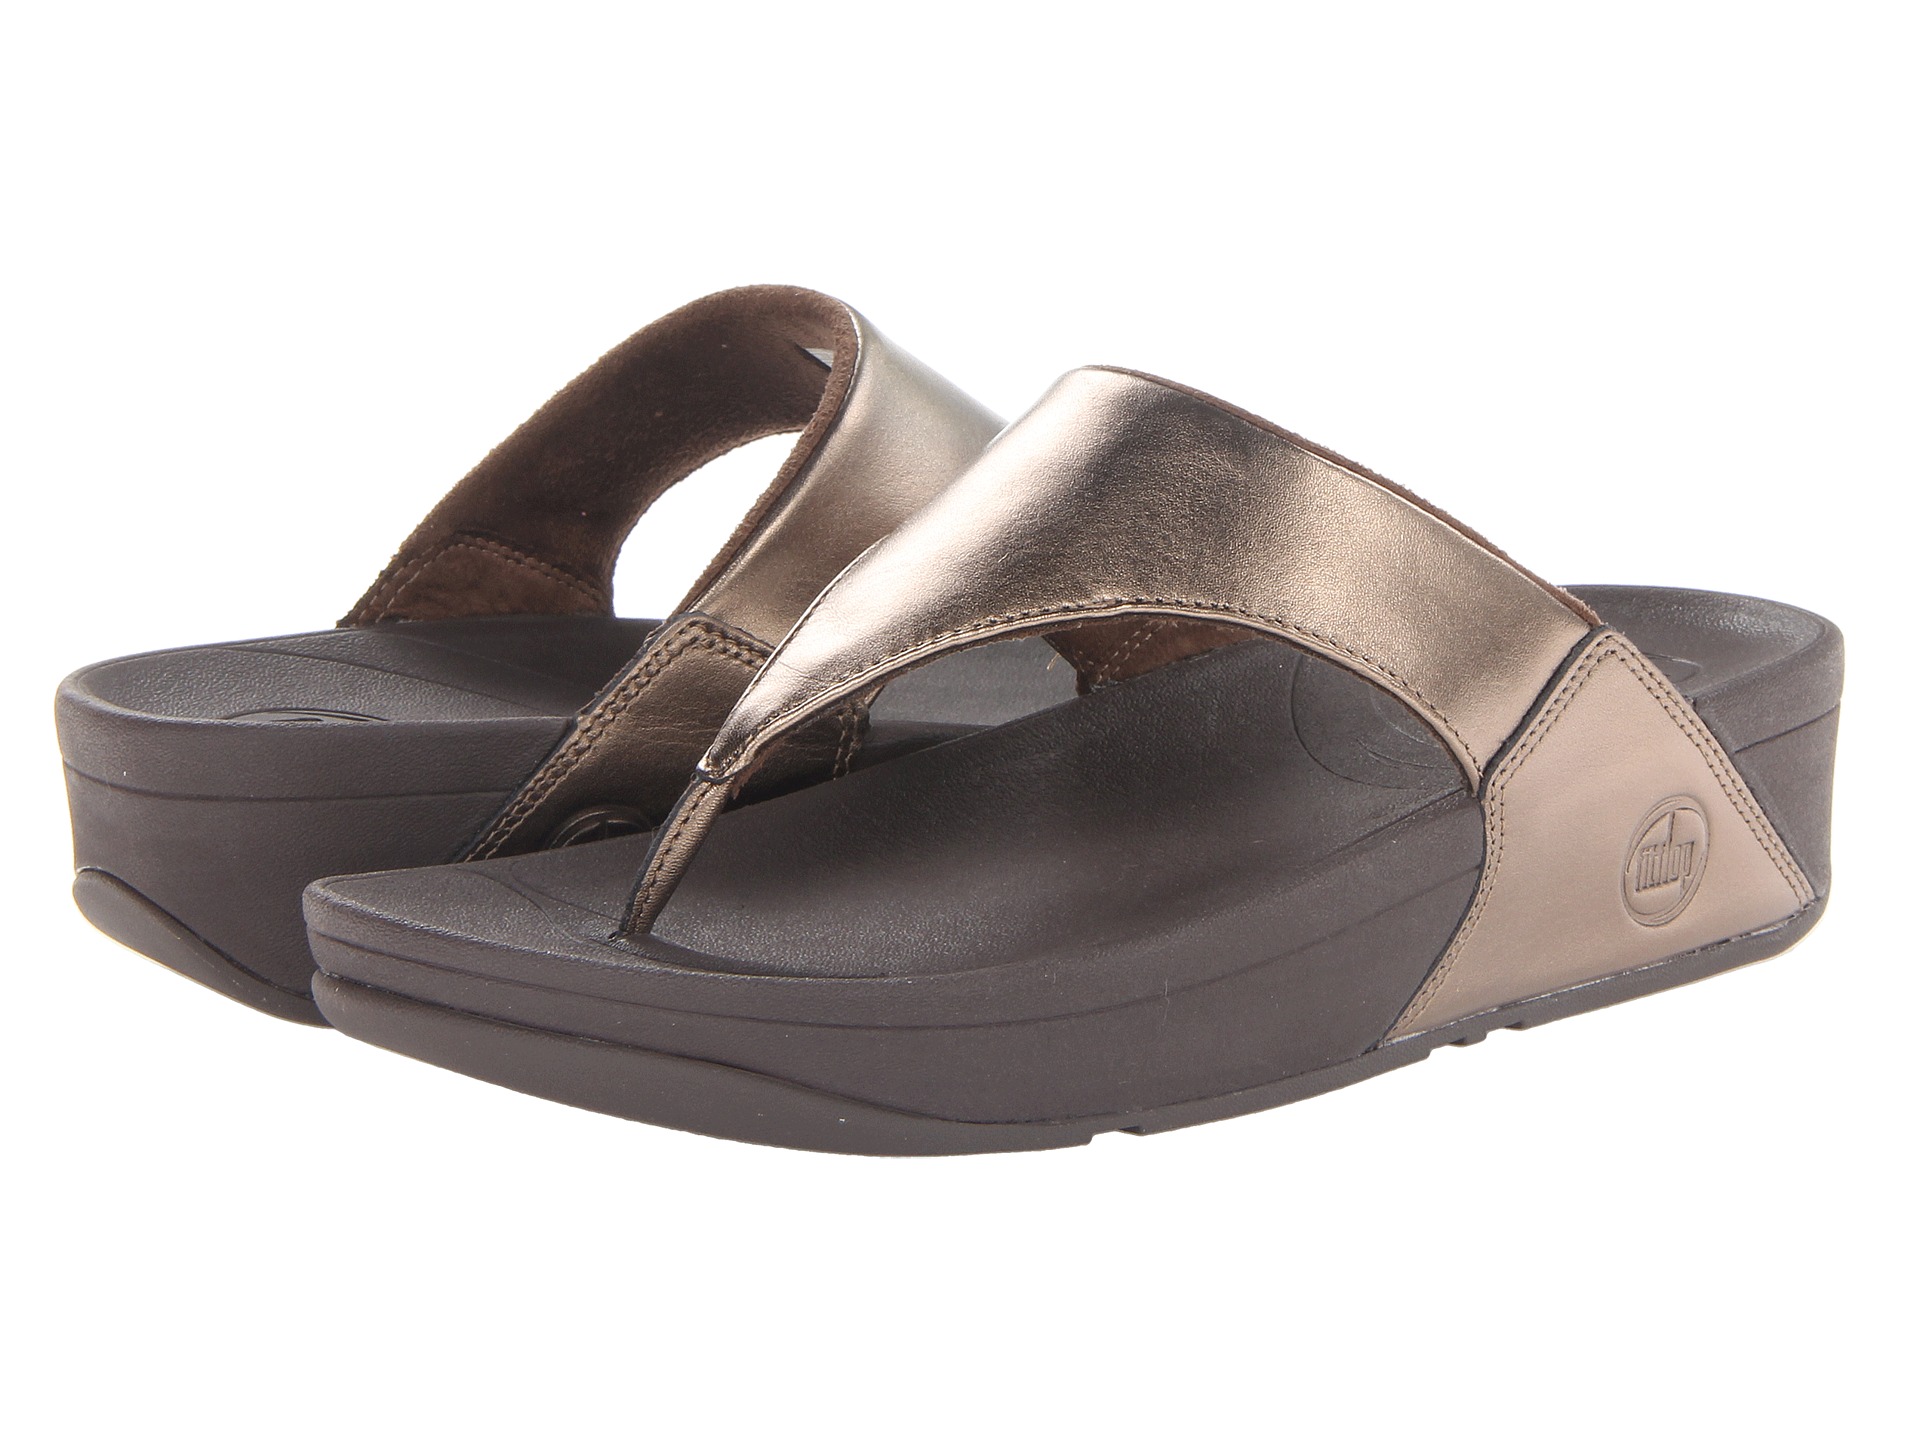 FitFlop Luluâ„¢ - Zappos Free Shipping BOTH Ways